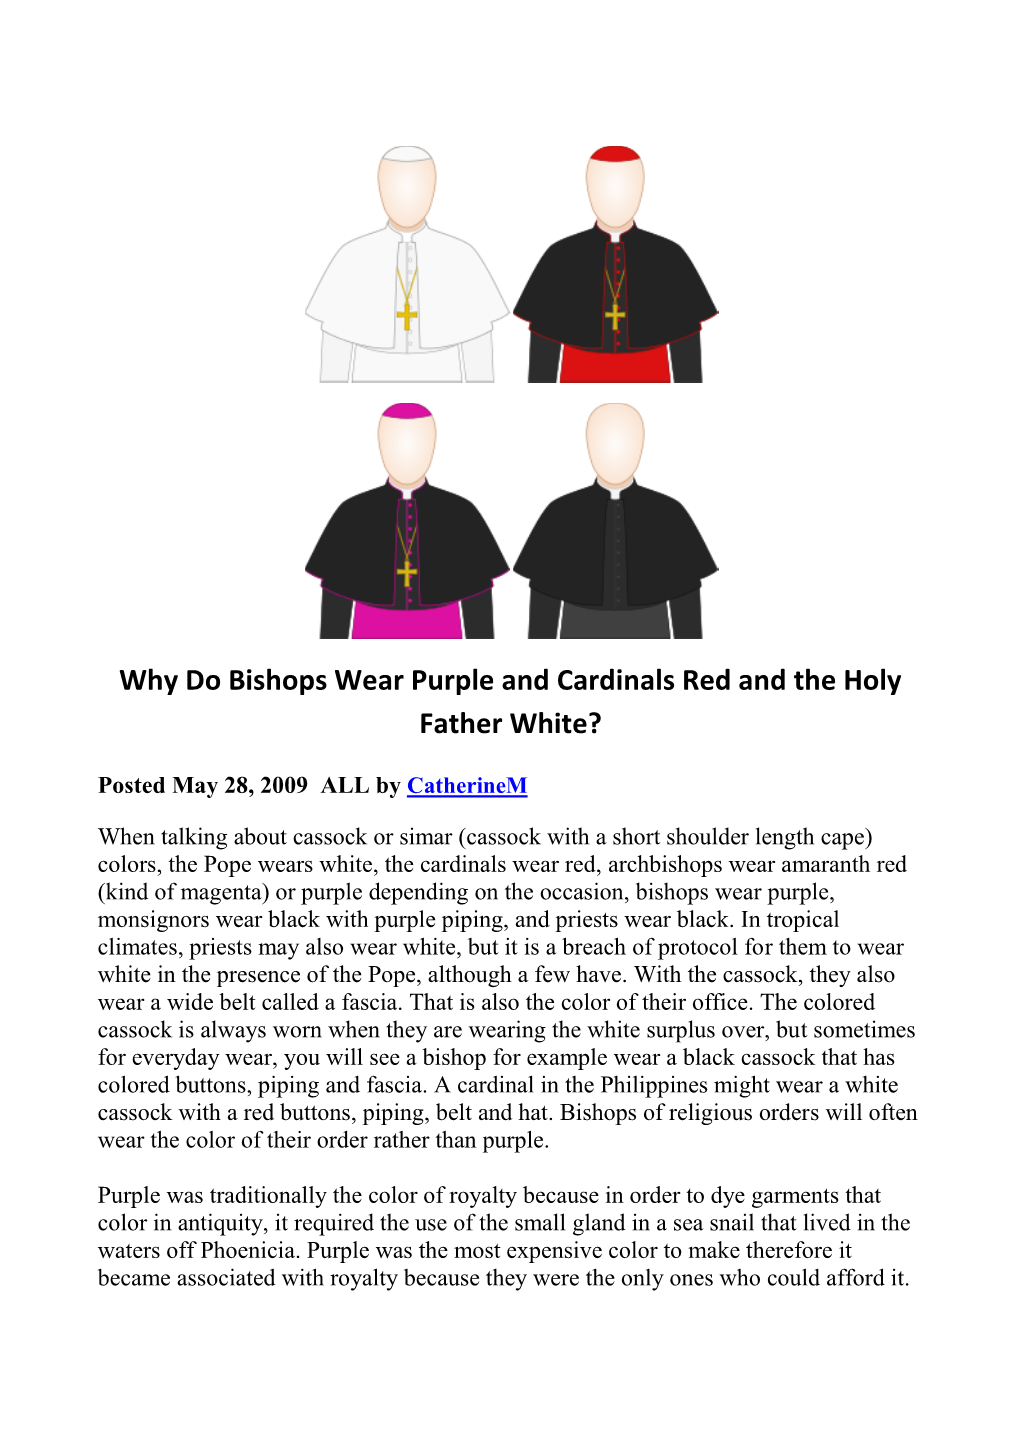 Why Do Bishops Wear Purple and Cardinals Red and the Holy Father White?